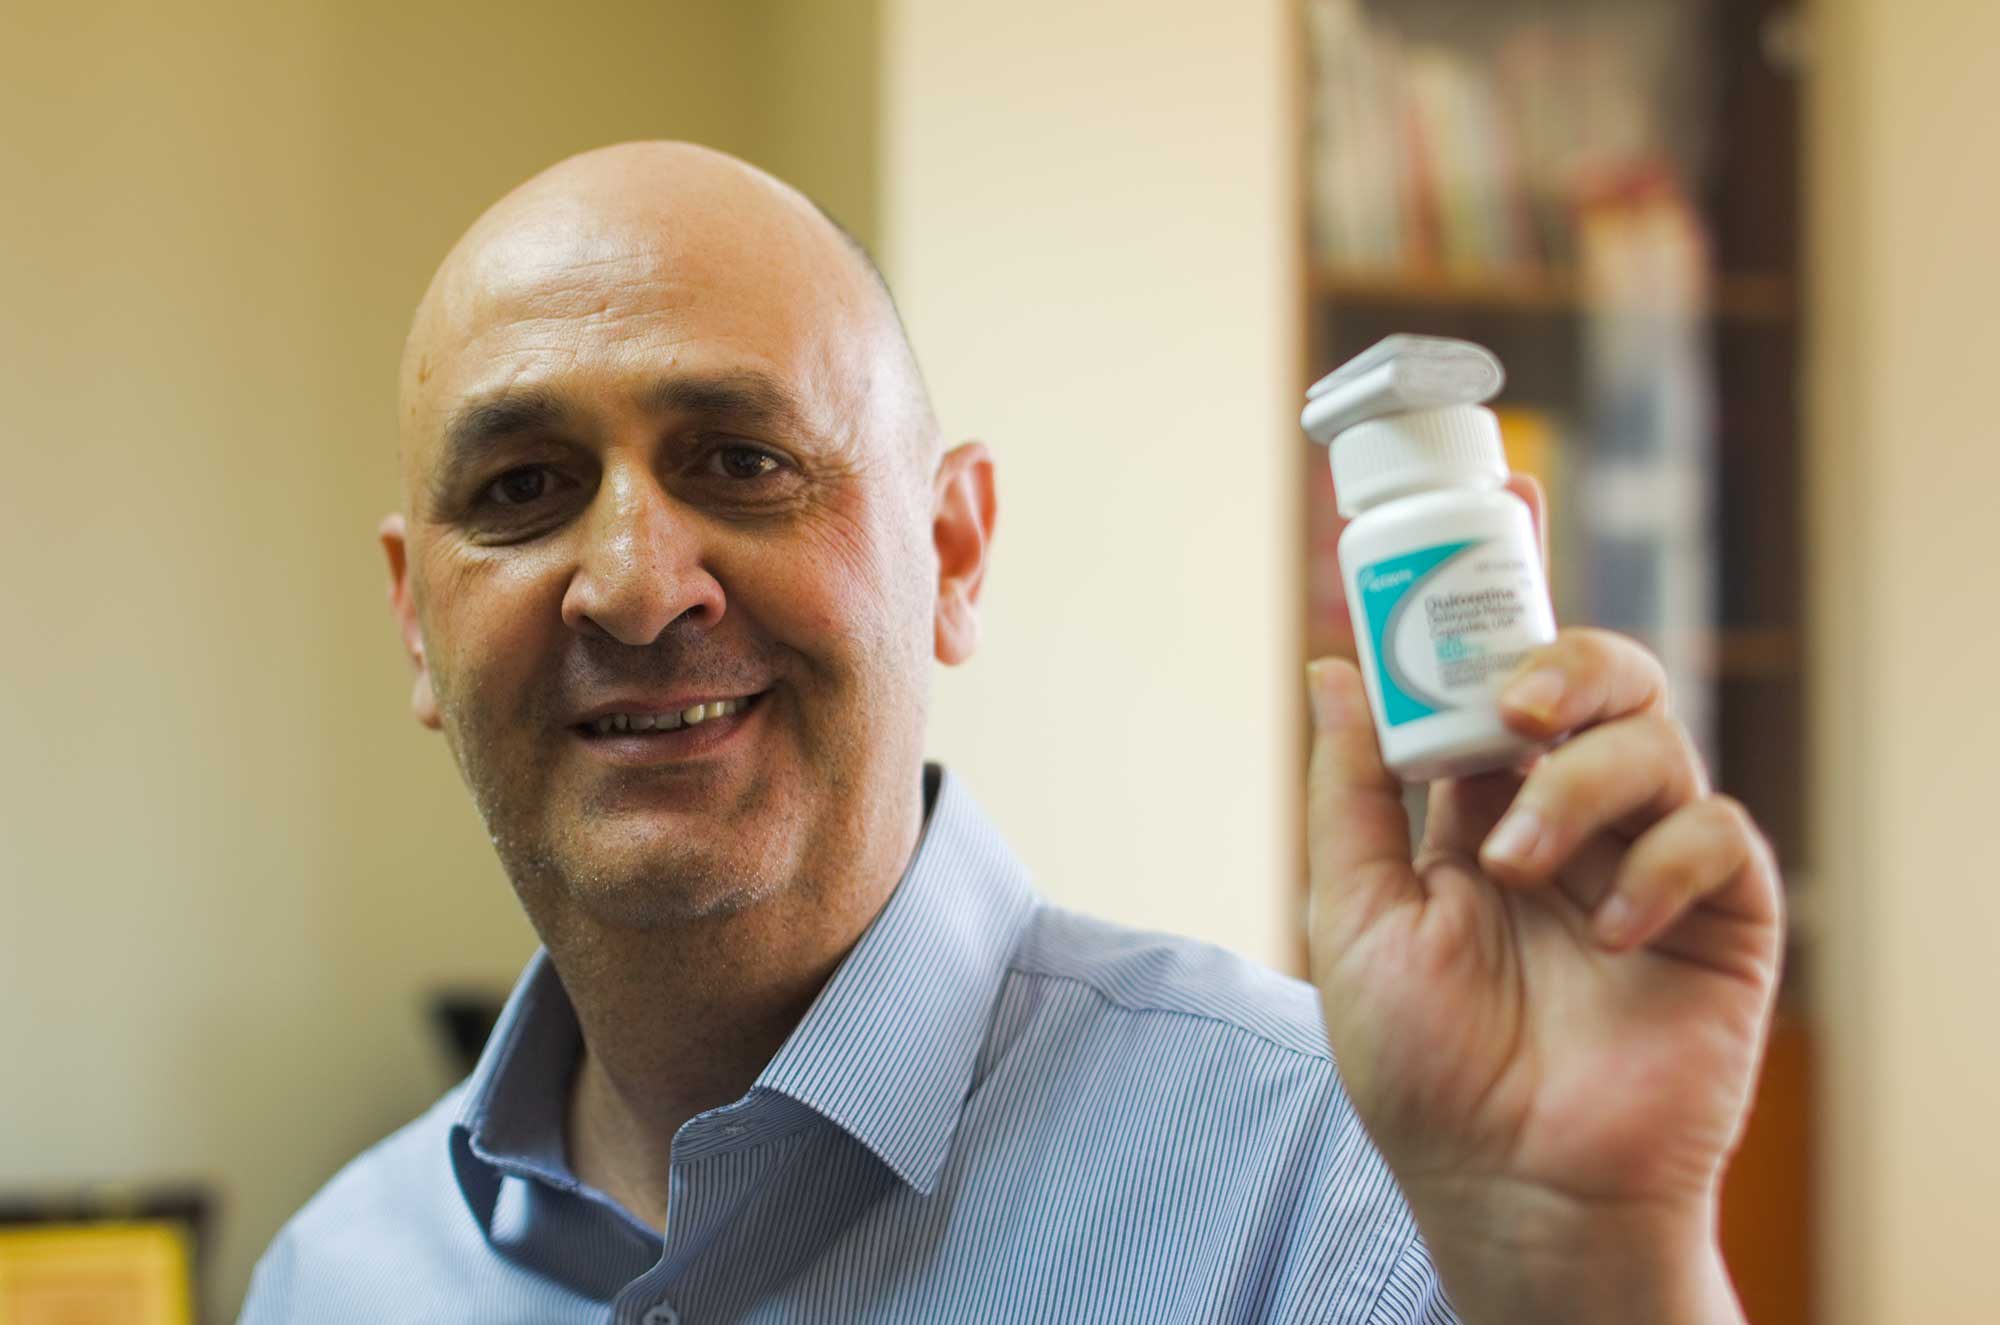 Thanks to donations from the Anera community, Mohammad gets the medicine he needs to help deal with depression.